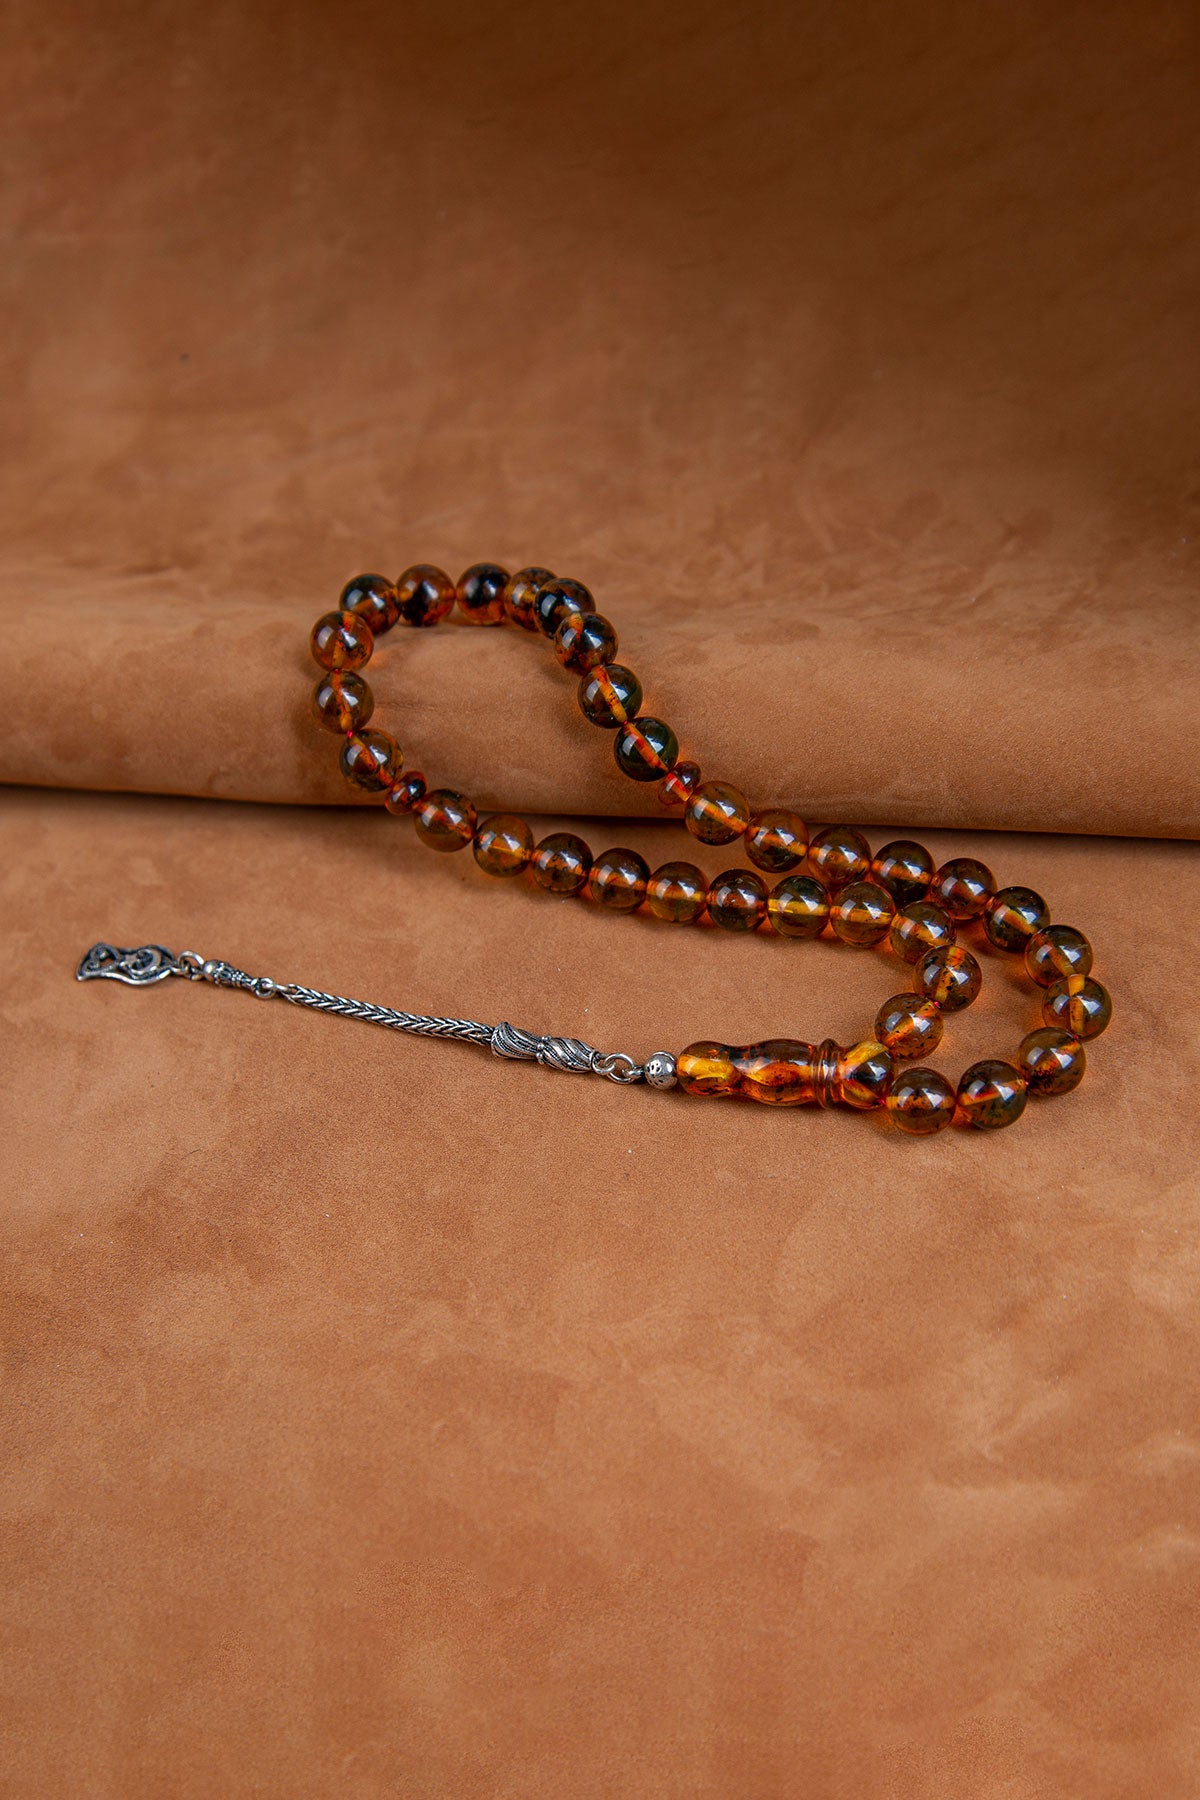 Ve Tesbih Sphere Cut Pressed Amber Rosary with Silver Tassels 1